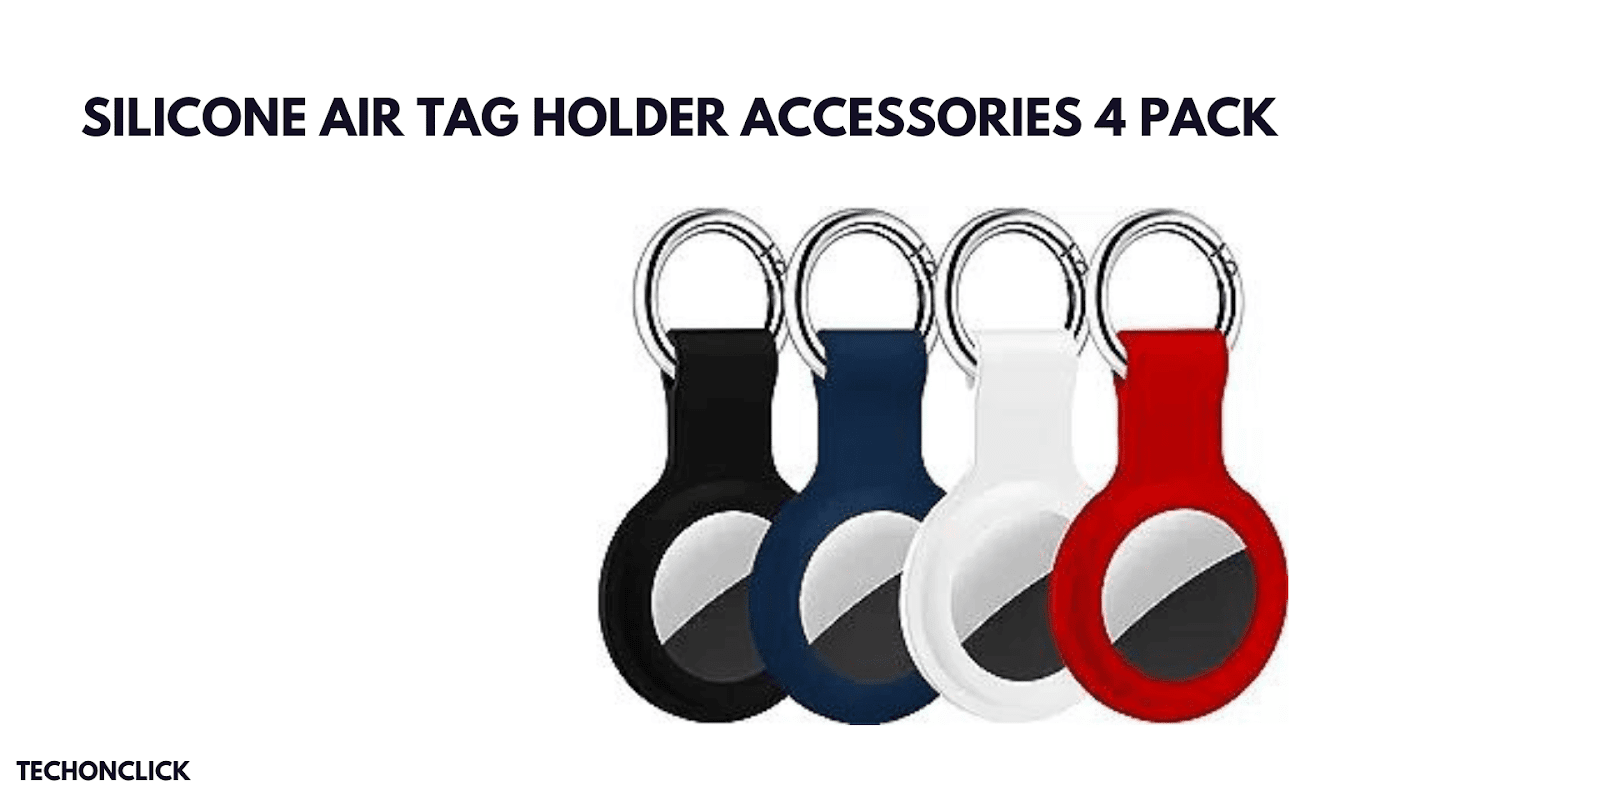 Silicone Air Tag Holder Accessories 4 Pack: